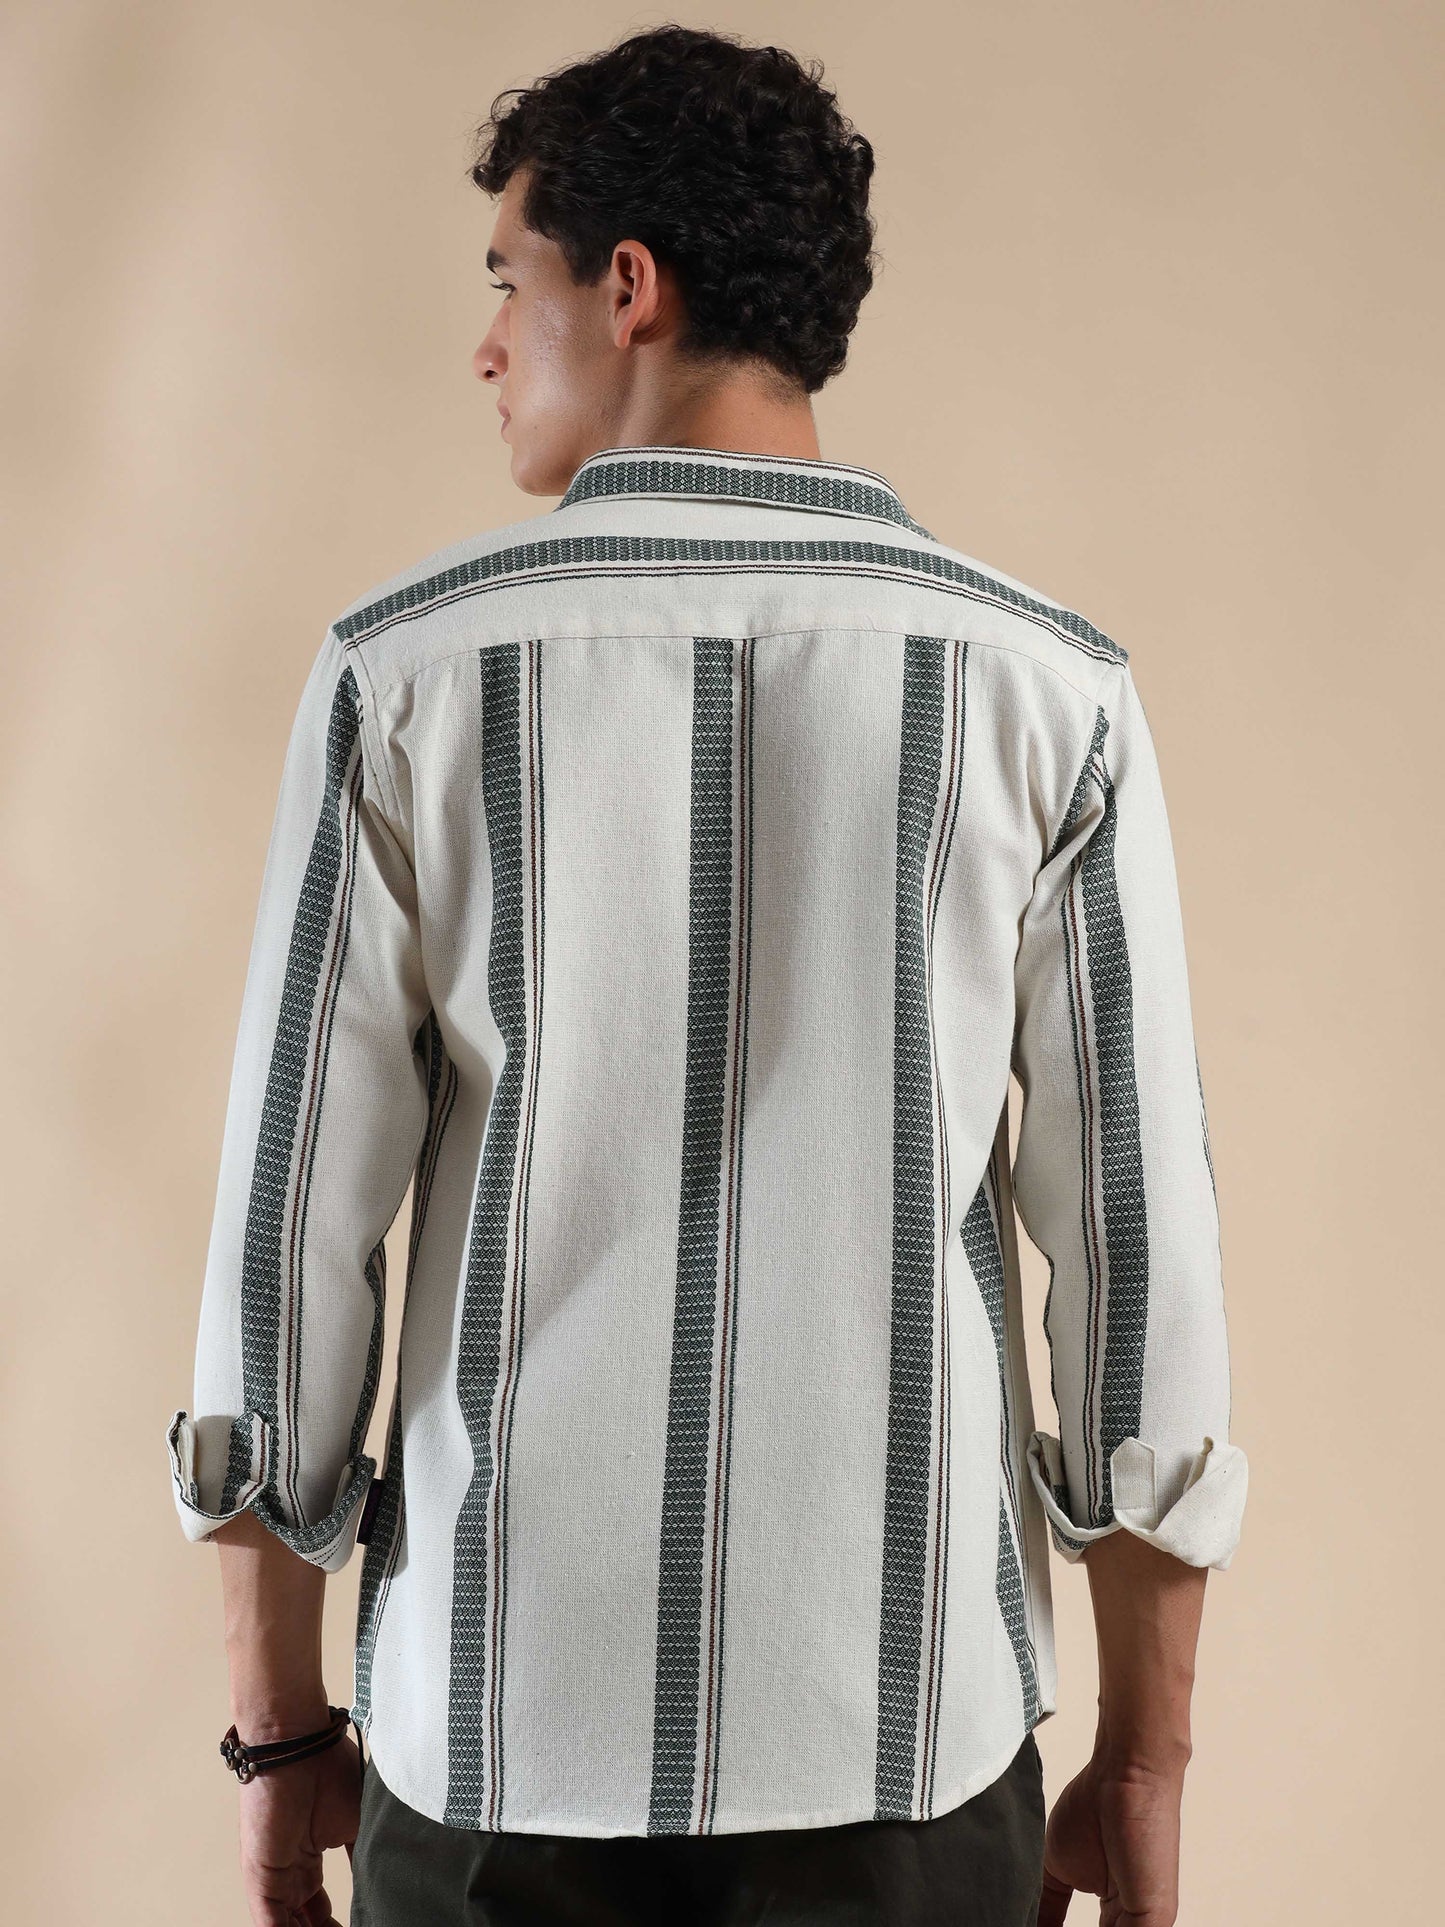 deep moss full sleeve green and white striped shirt